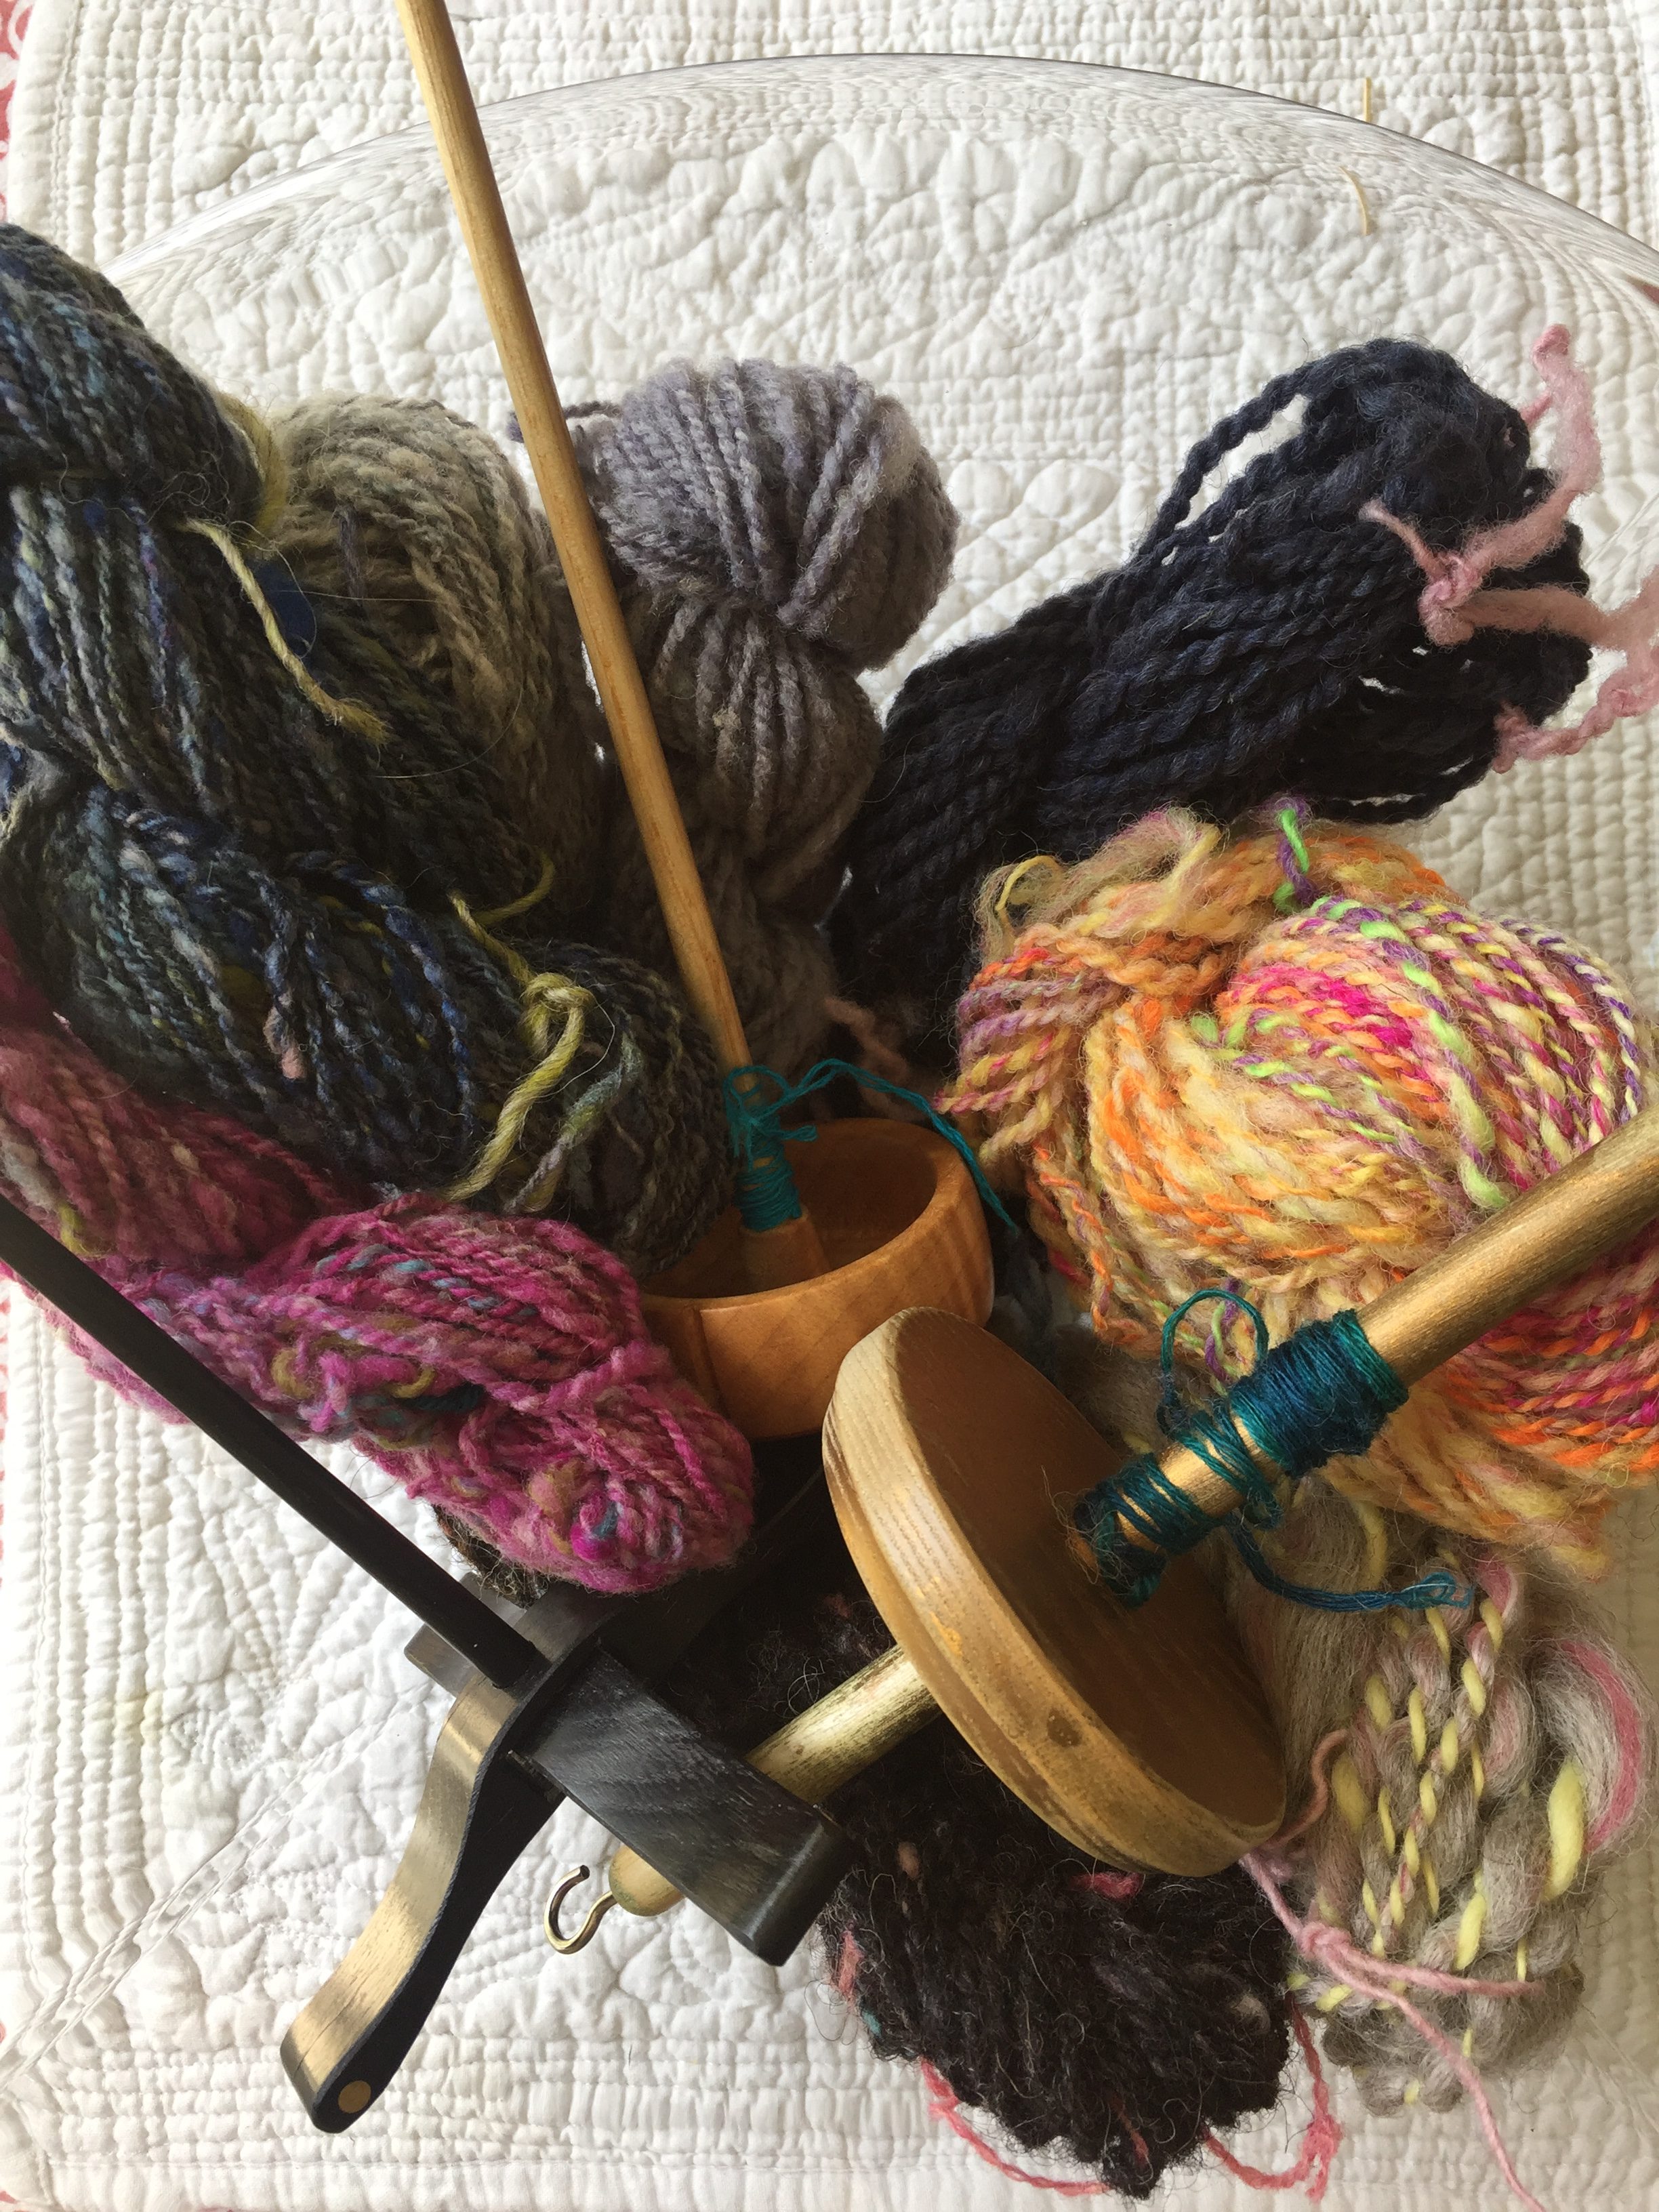 How to Wind Yarn VERY QUICKLY with a Yarn Winder & Swift - Yay For Yarn